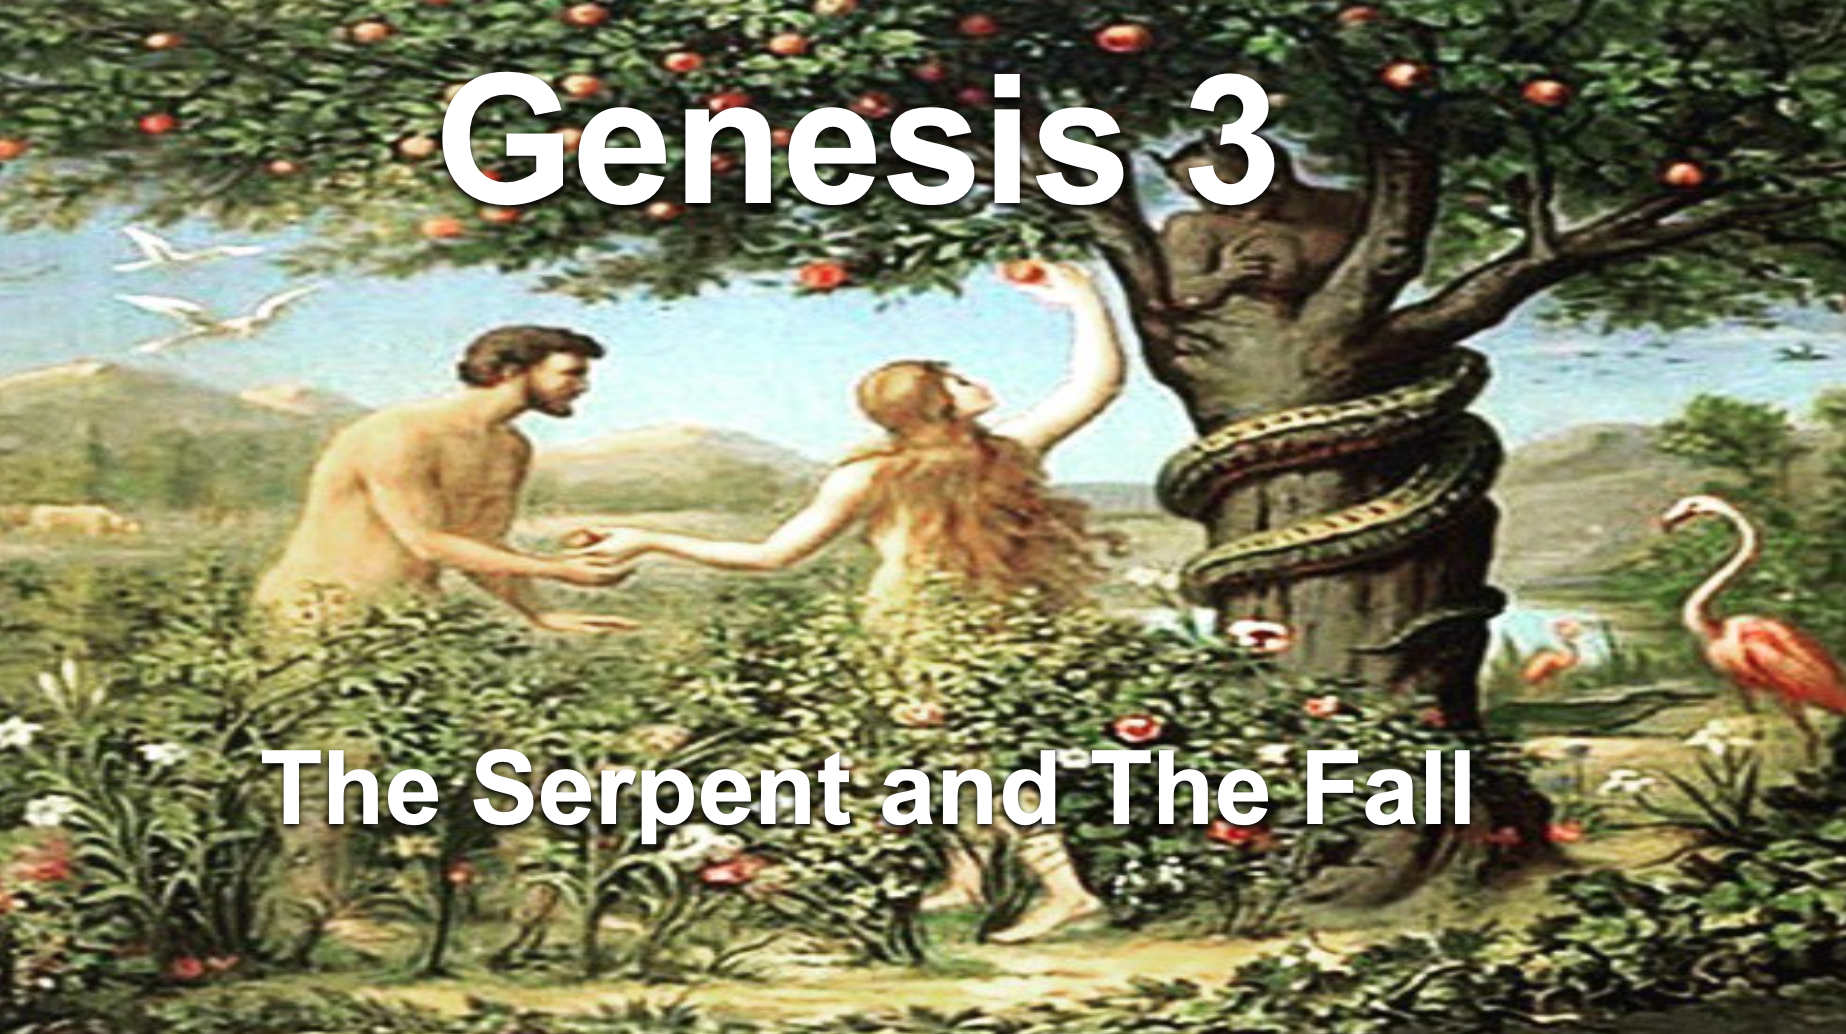 Genesis 3 - The Serpent and The Fall